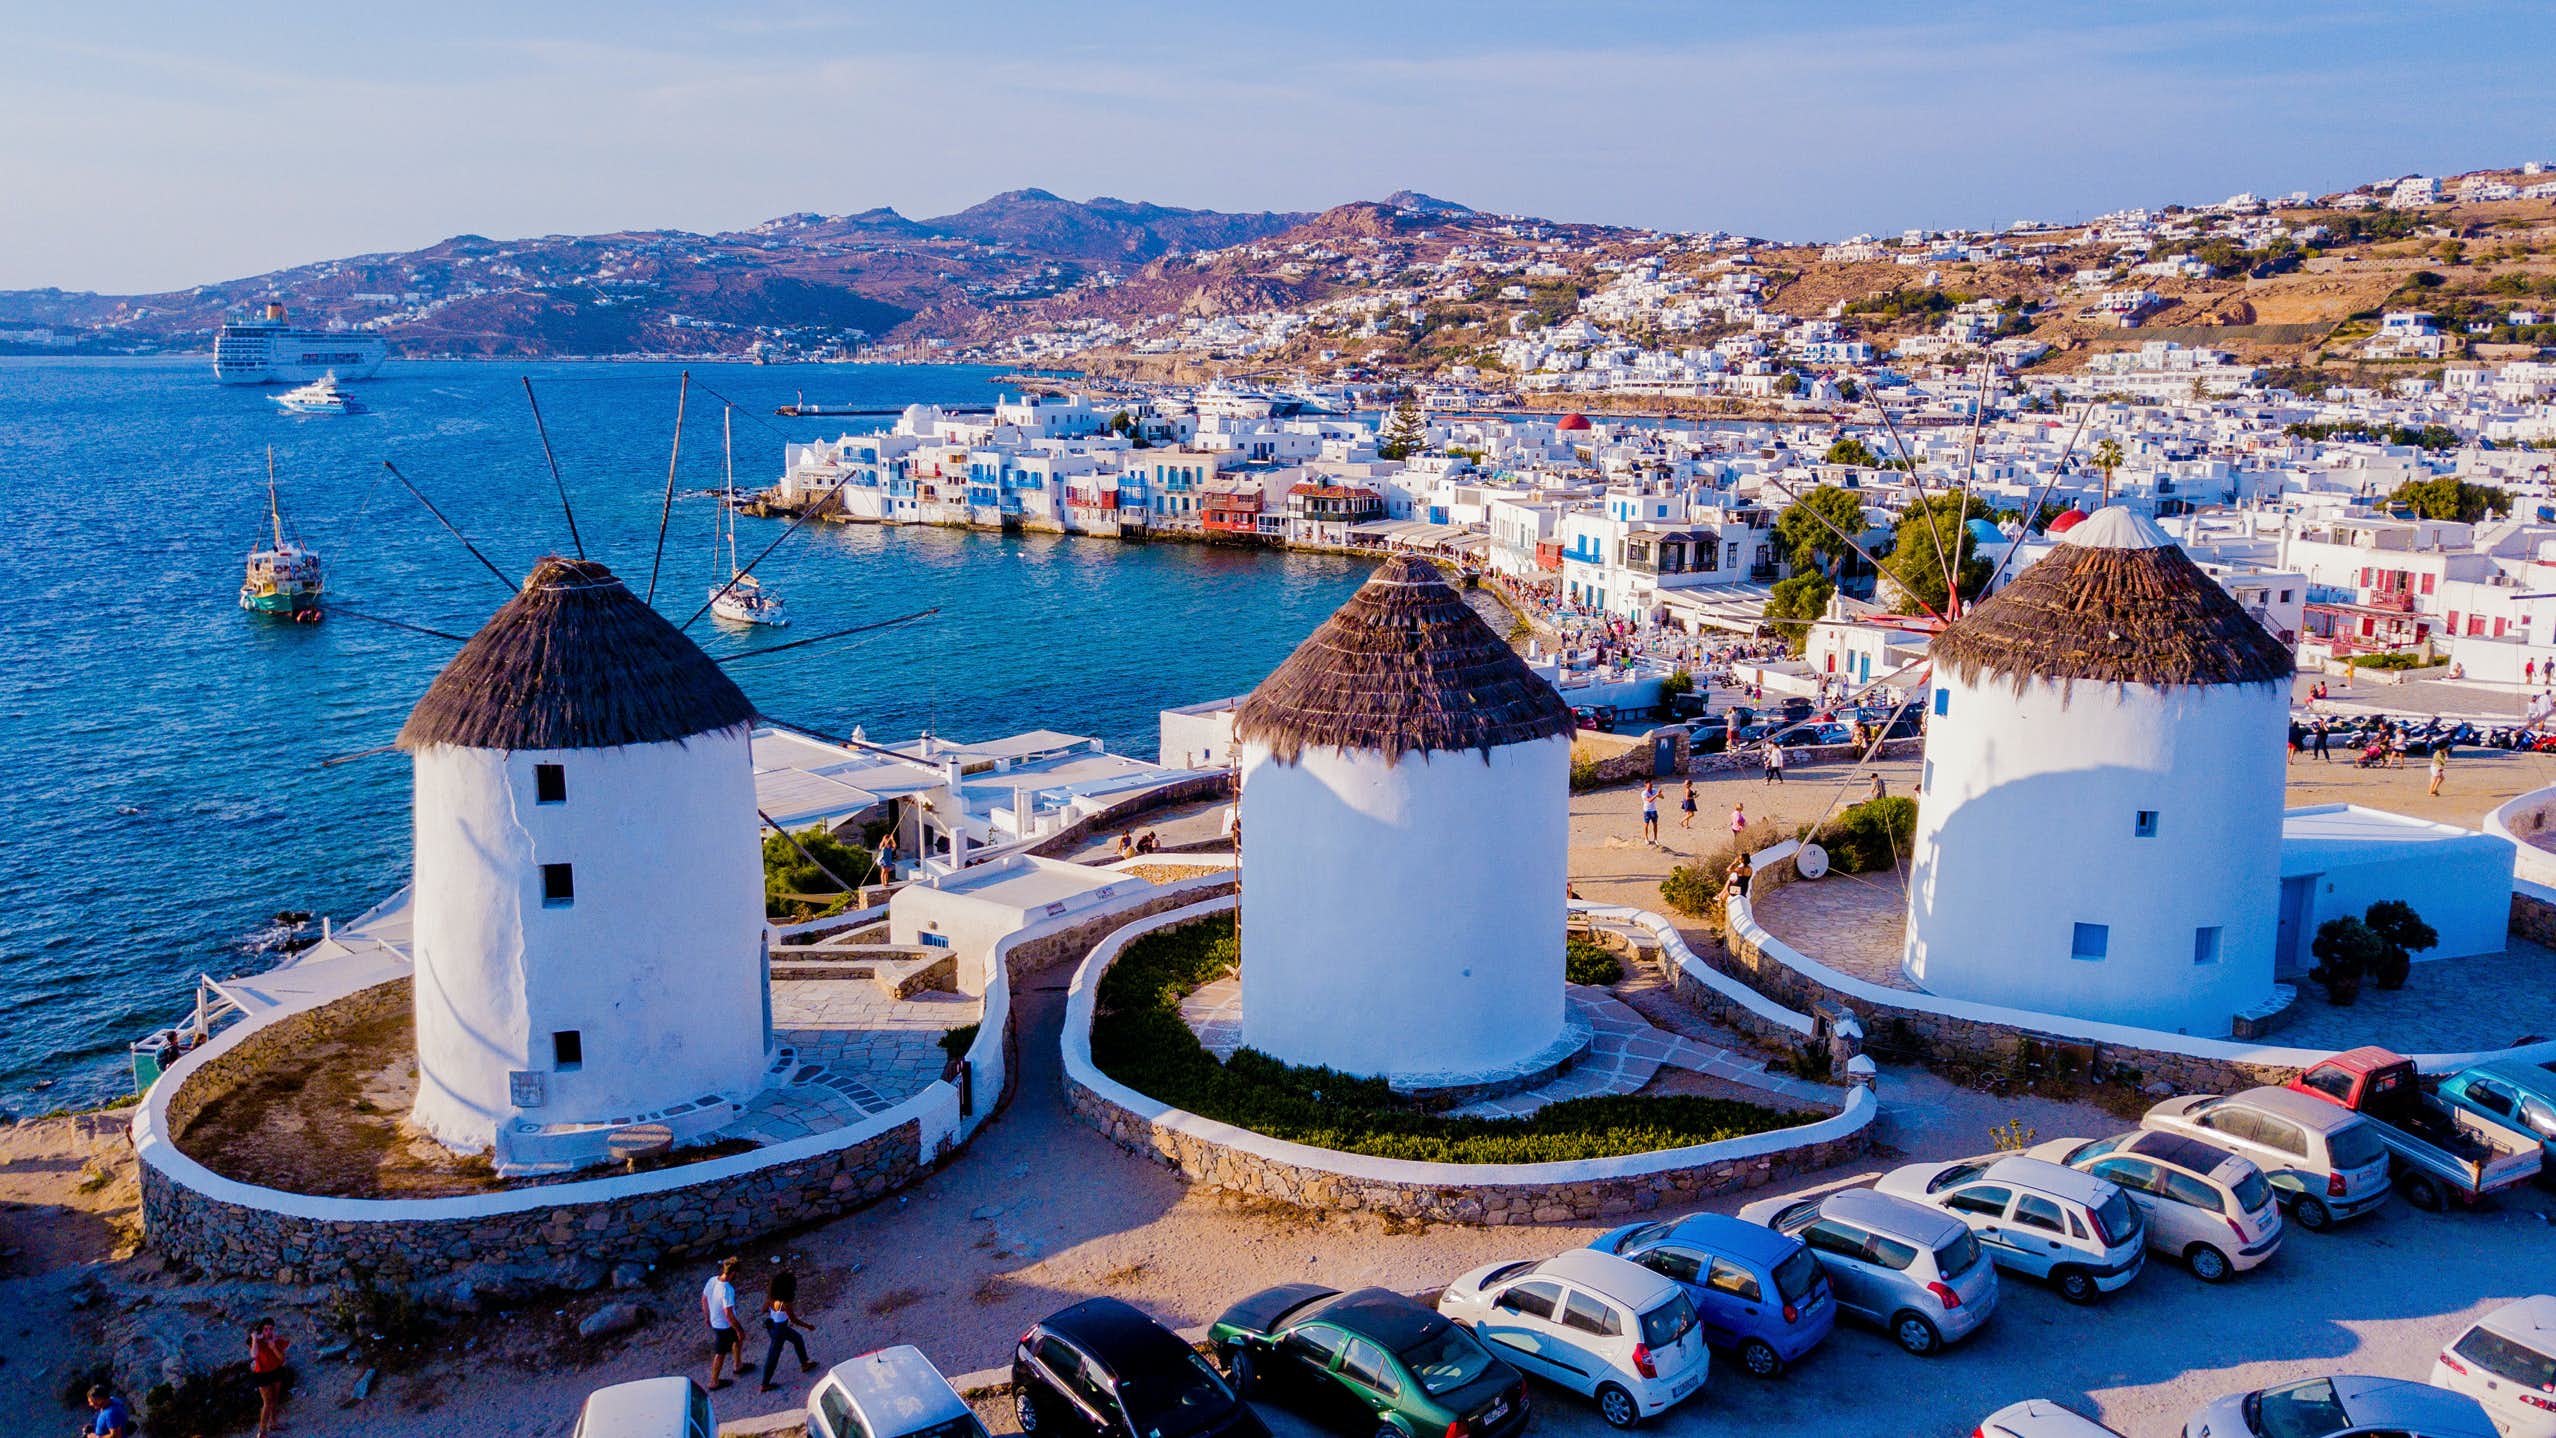 East Mediterranean Yacht Charter - Panoramic view of Mykonos town, Cyclades islands, Greece and sailing charter